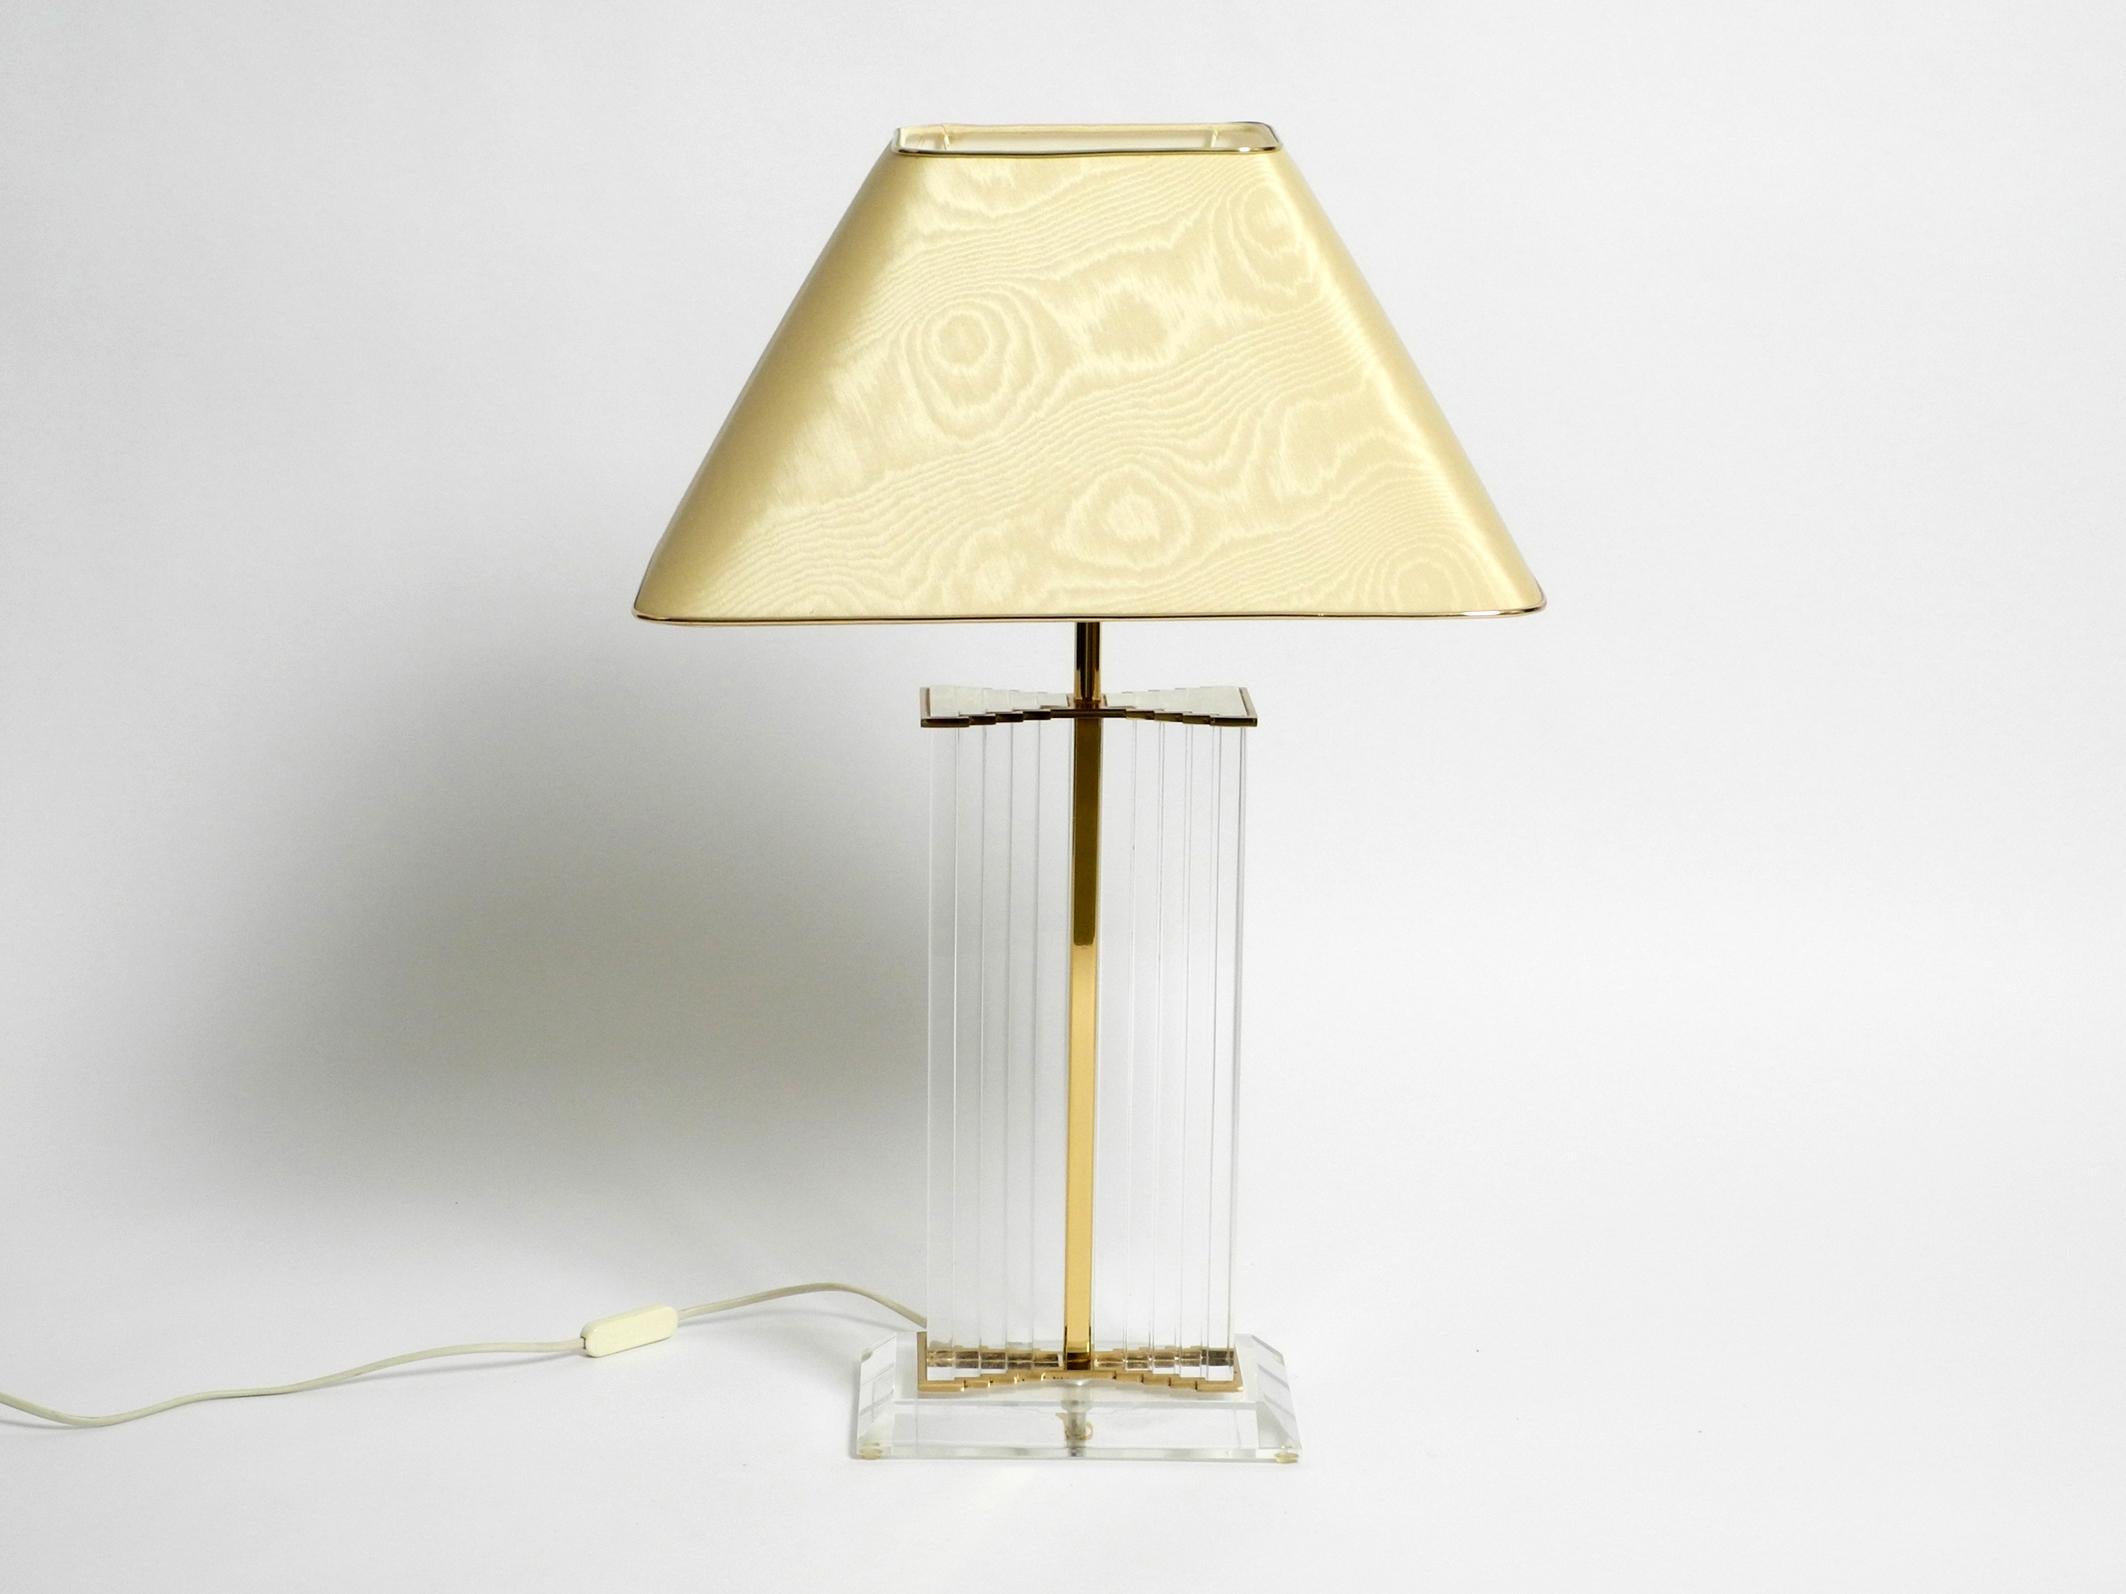 Hollywood Regency Very Rare Elegant Large Plexiglass Table Lamp from the 1970s with Silk Shade For Sale